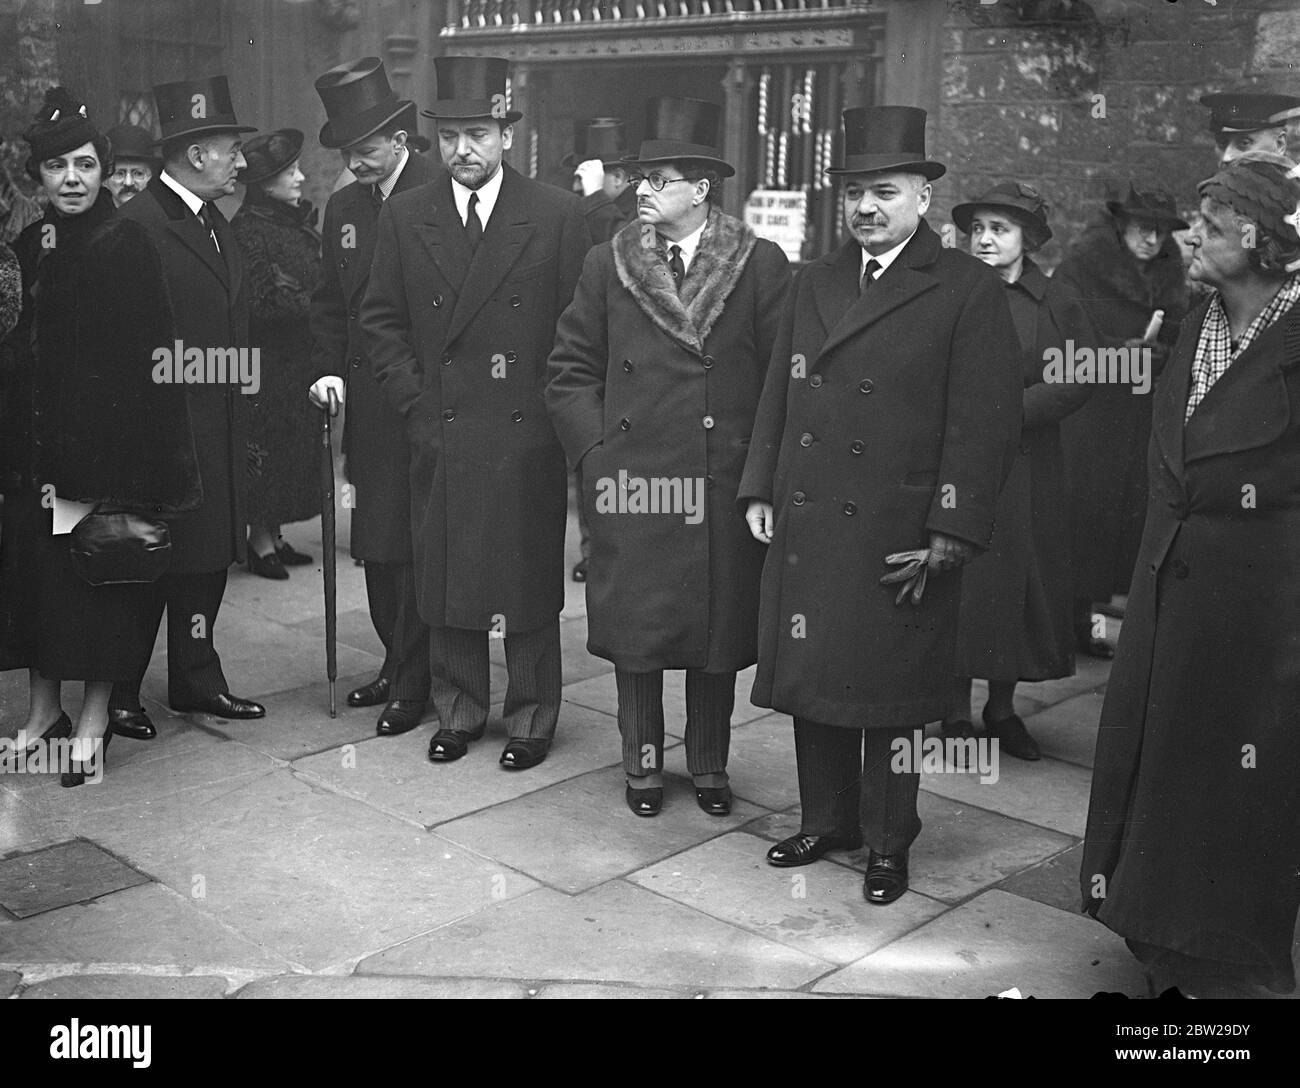 Ambassadors leave after funeral of Mr Ramsay MacDonald. The Premier, members of the Cabinet and Diplomatic Corps, attended the funeral Service in Westminster Abbey for Mr Ramsay MacDonald, England's first Labour Premier, who died at sea on holiday cruise to South America. Photo shows, Ambassadors, leaving after the service. From left to right Senhord Regis de Oliveira, (Brazil, Profile), Count Grandi (Italy), Baron Palmstierna (Swedish), and M Jean Maisky, (Soviet). 26 November 1937 Stock Photo